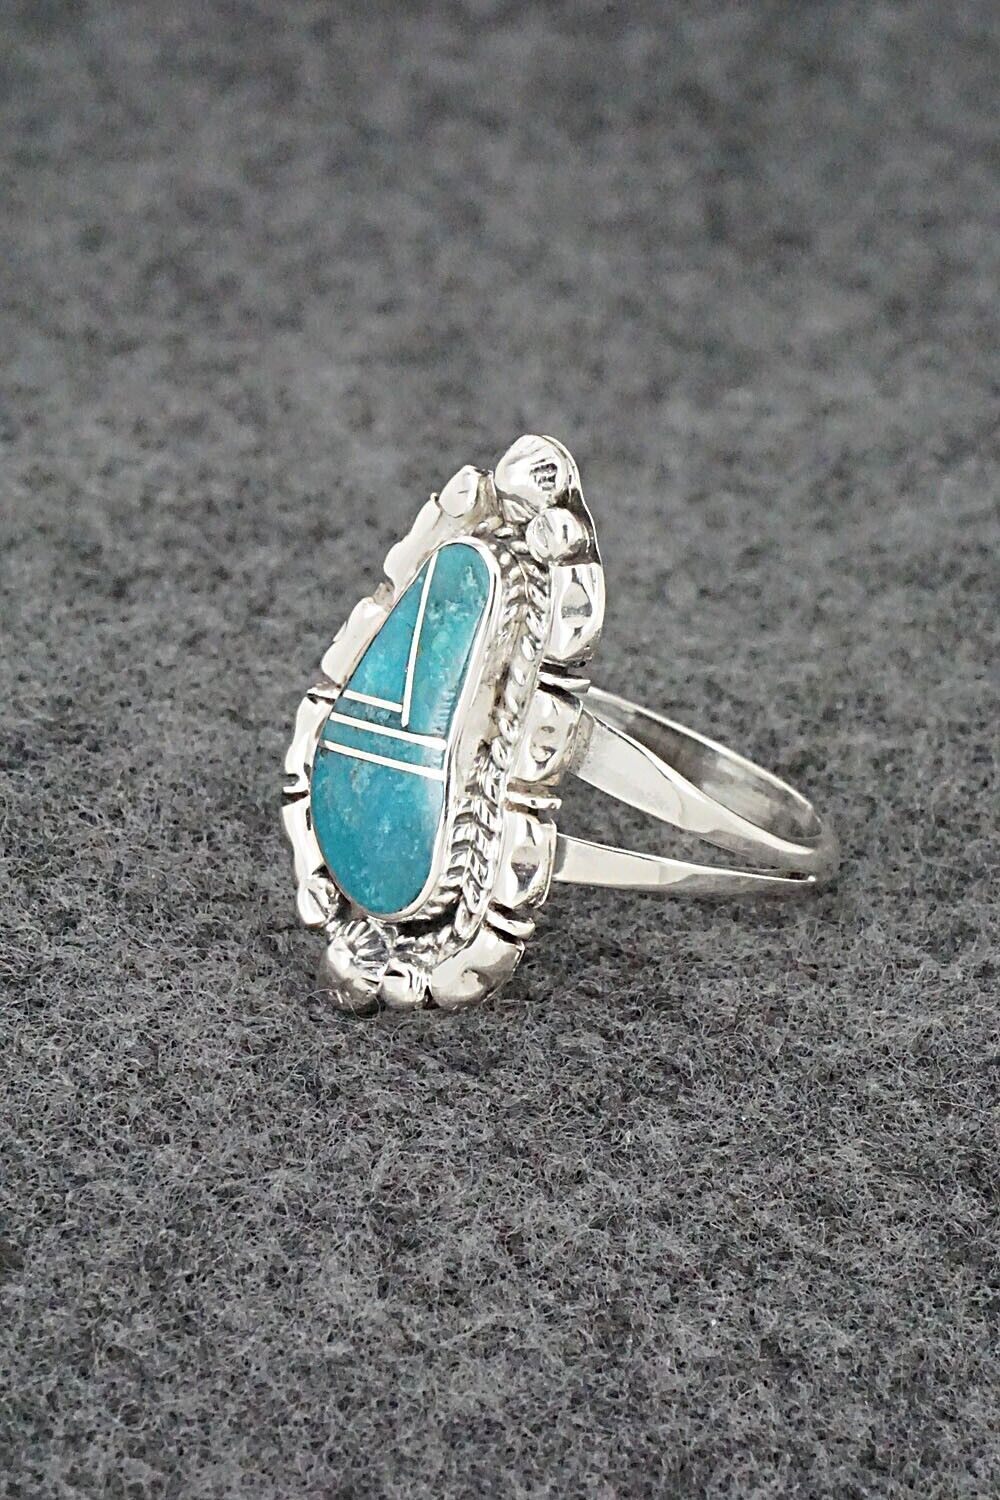 Turquoise & Sterling Silver Inlay Ring - James Manygoats - Size 9